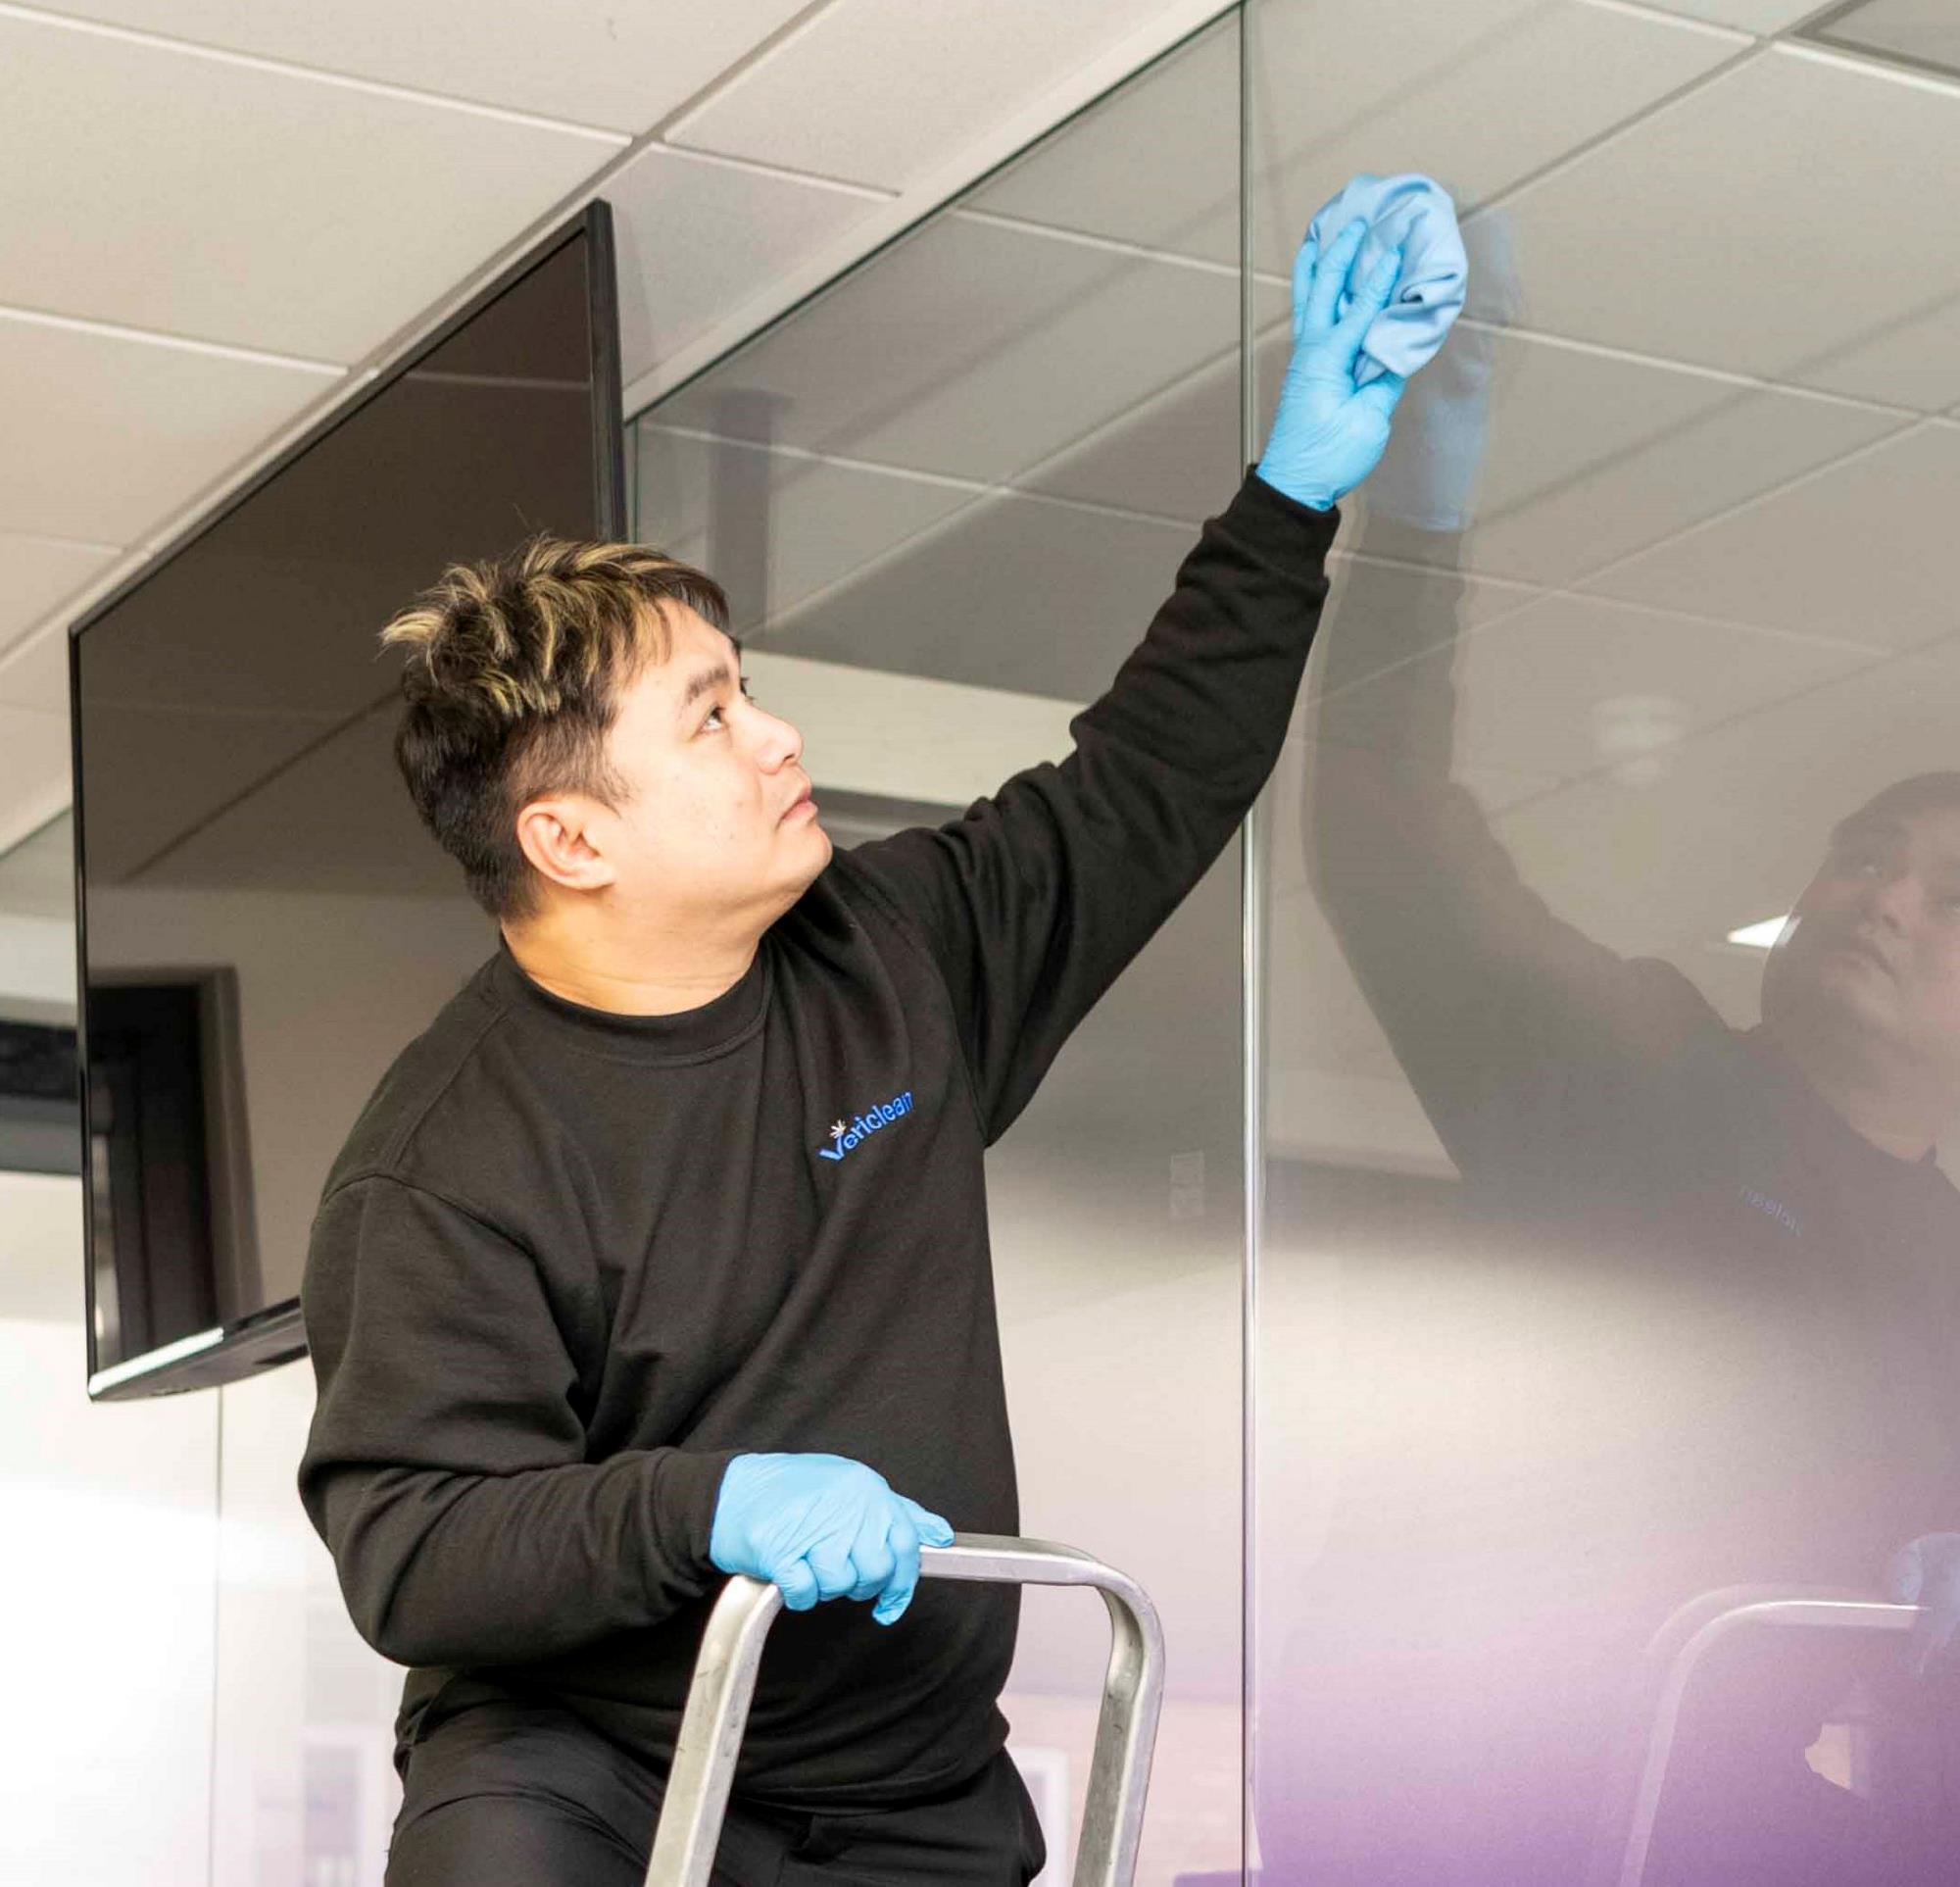 
				All of our window cleaners are fully trained,qualified and wear a uniform they have also undergone a DBS check.

				We carry out comprehensive risk assessments and method statements before any work is carried out.

				The company is fully insured up to £10 million